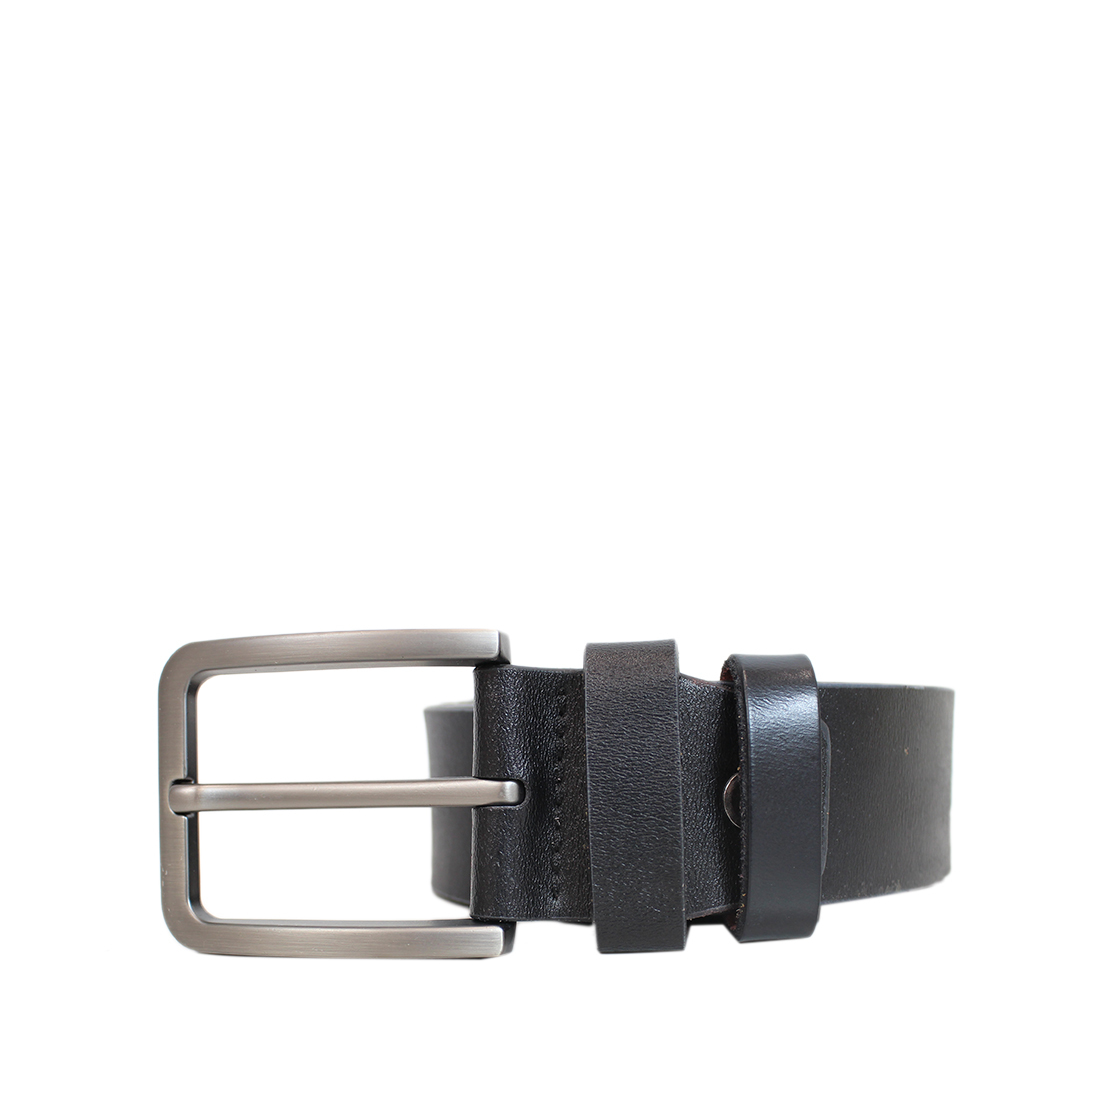 Plain with small rectangle buckle